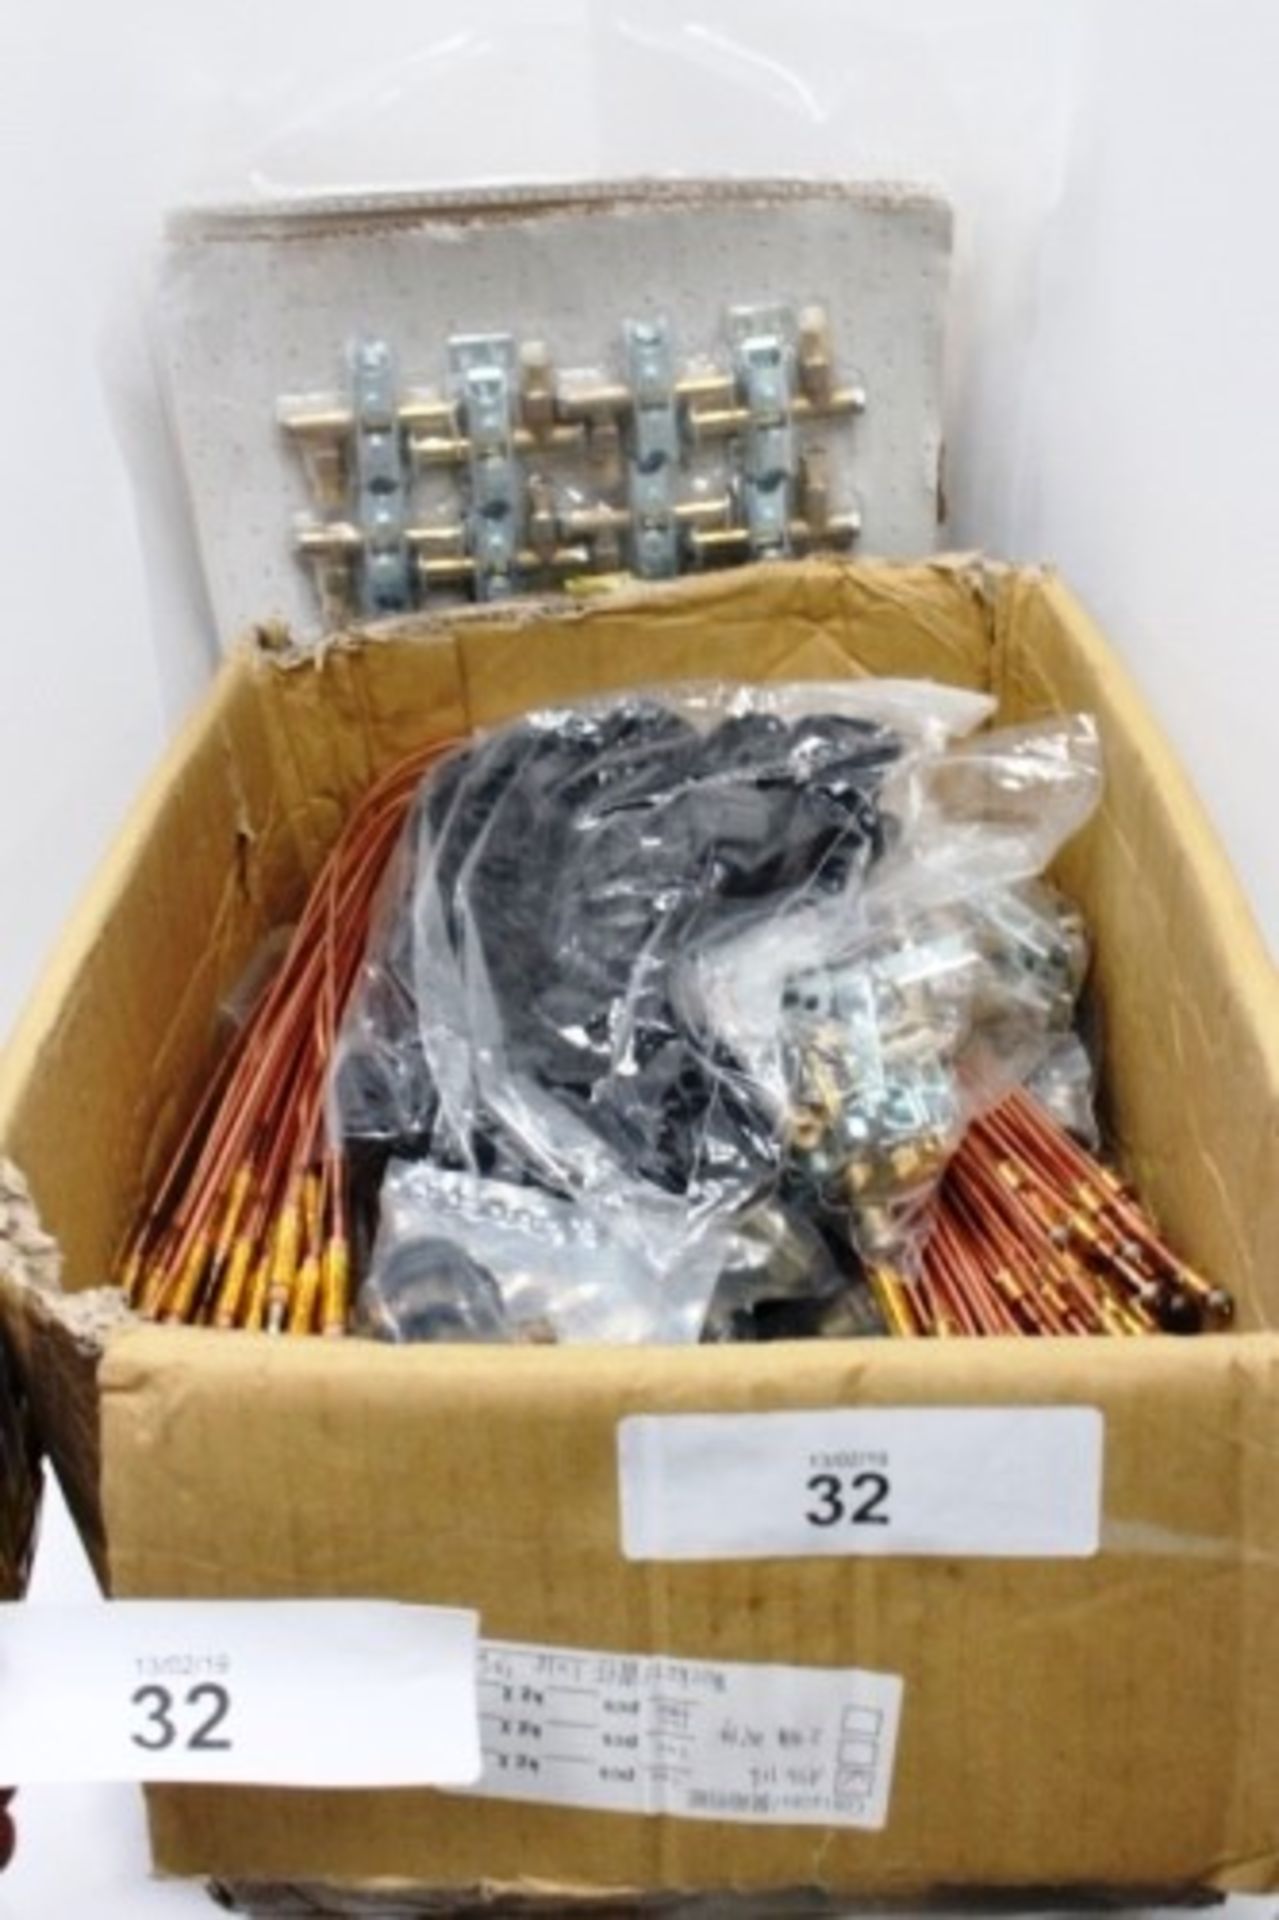 A lot of cooker spare parts including 50 x gas valves and igniters, 50 x 'L' shaped gas couplers